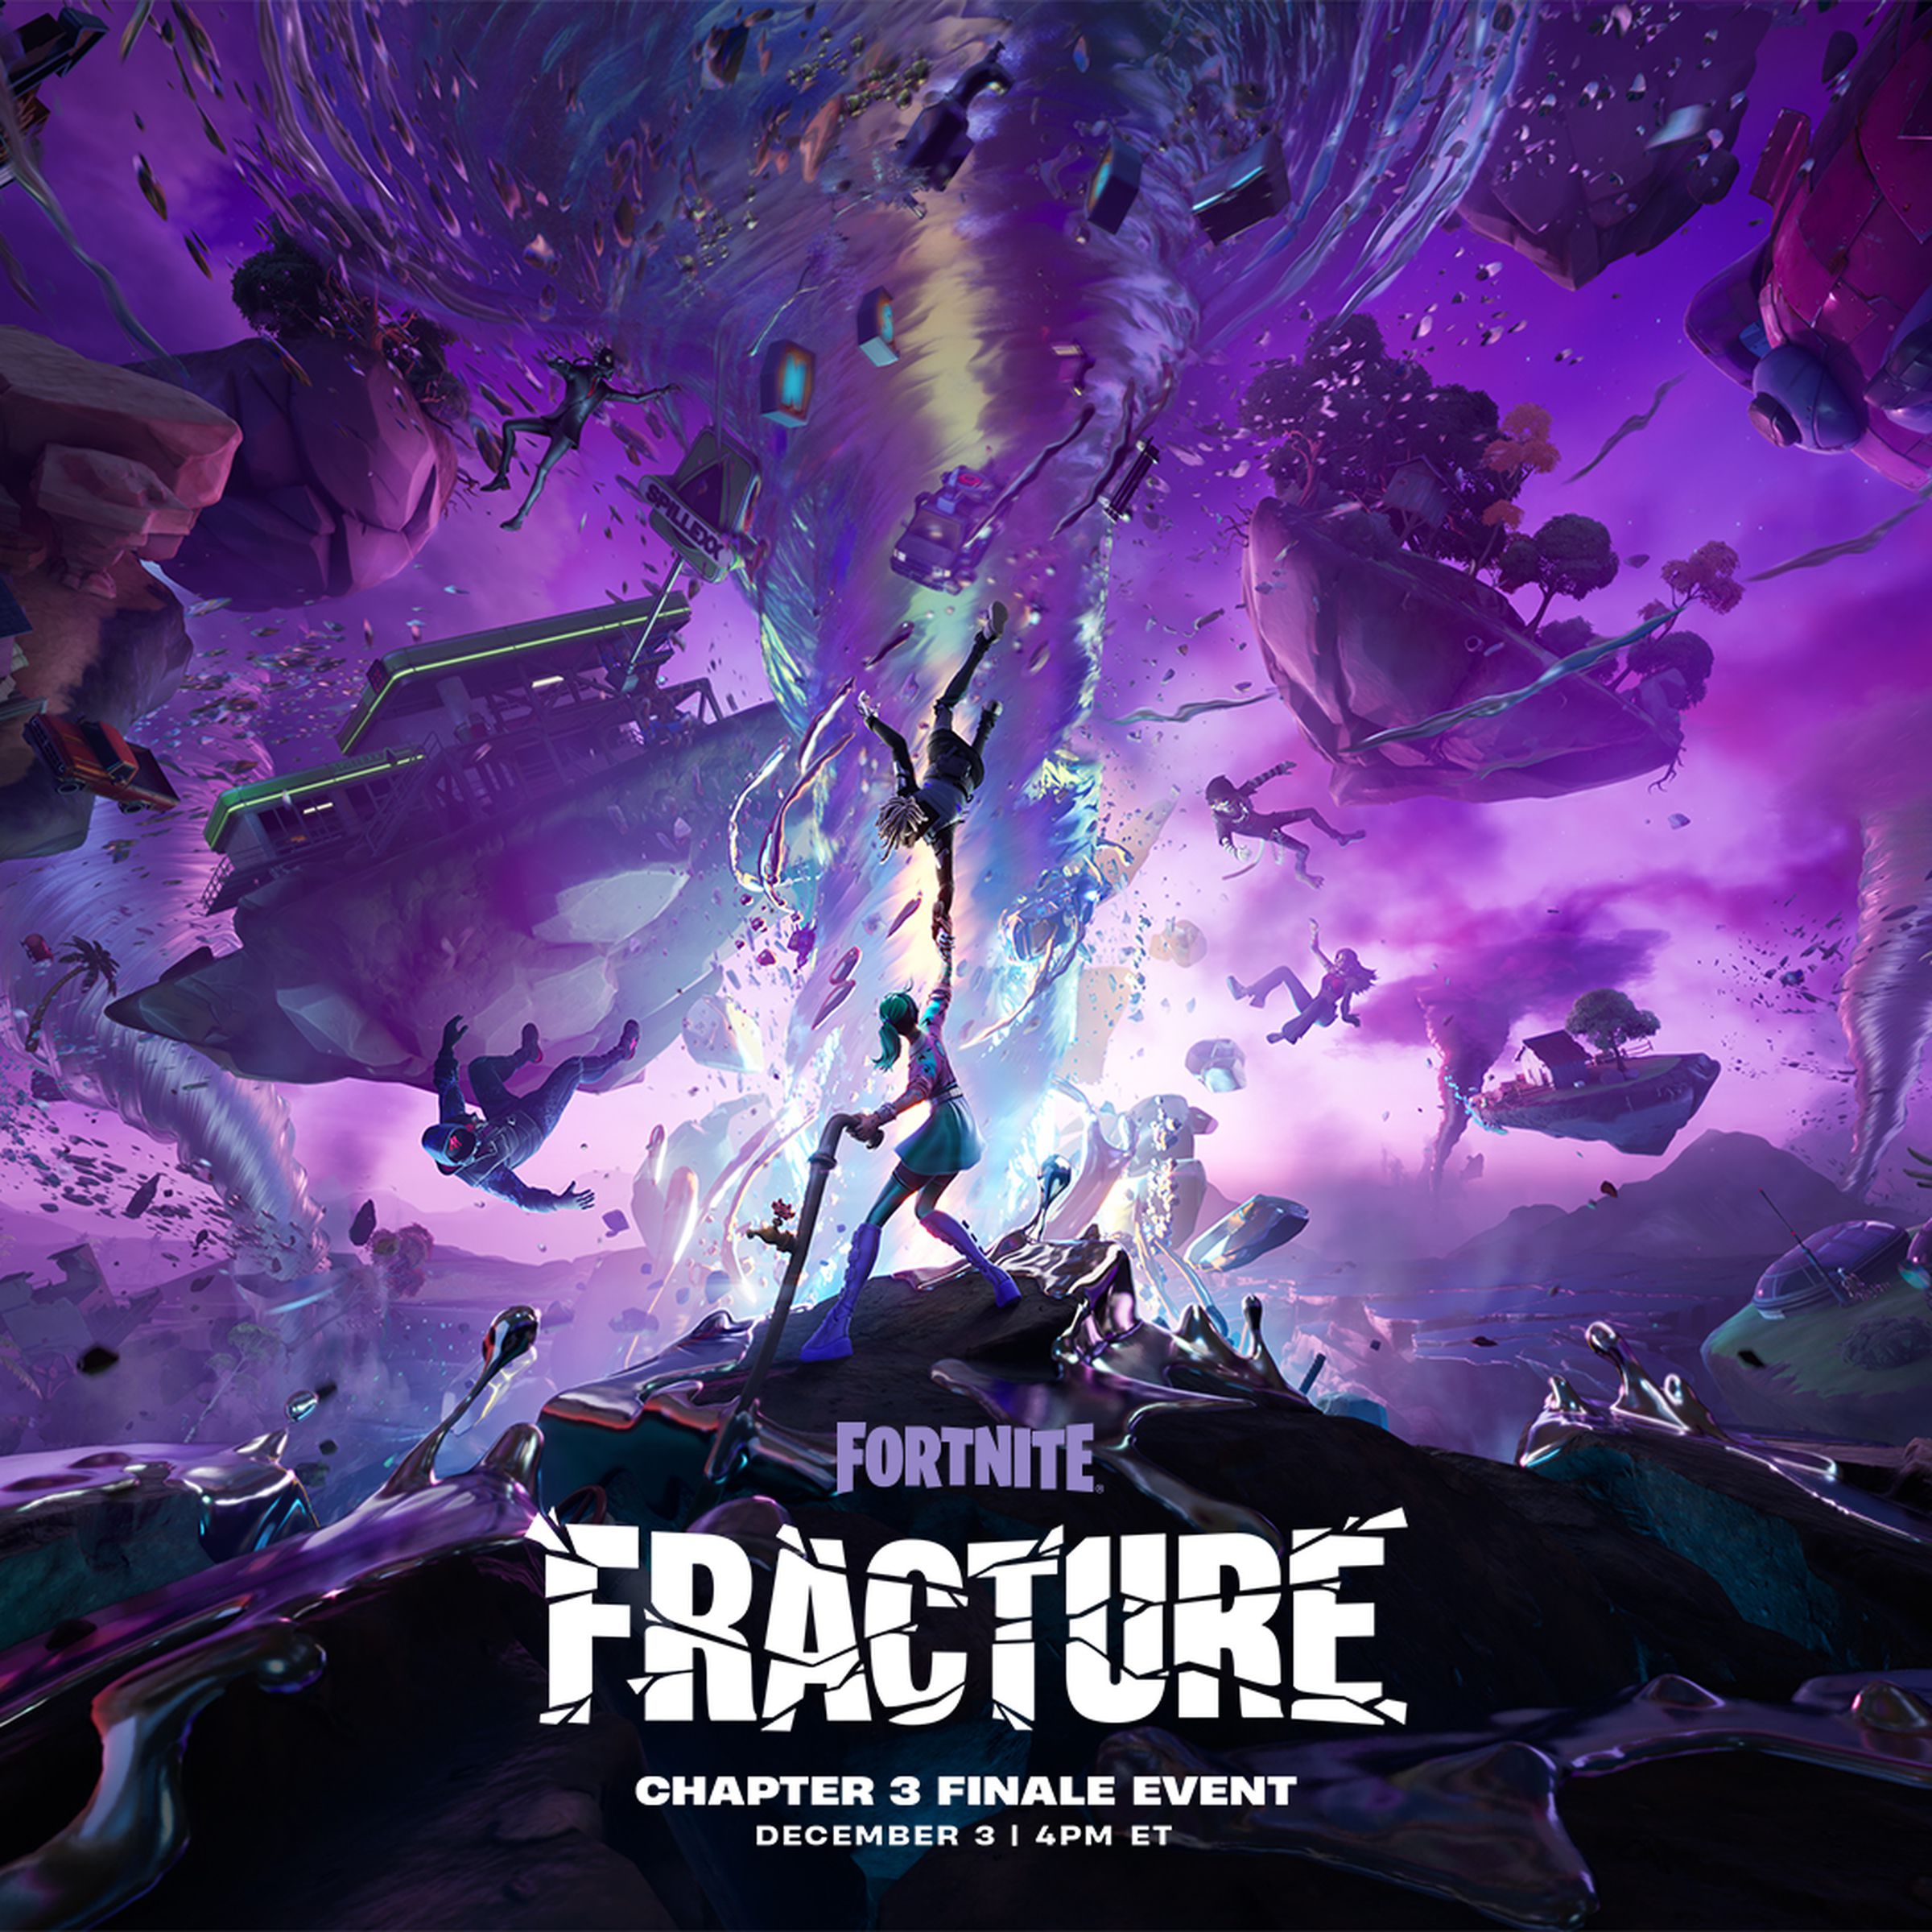 Key art for Fortnite’s “Fracture” live event.